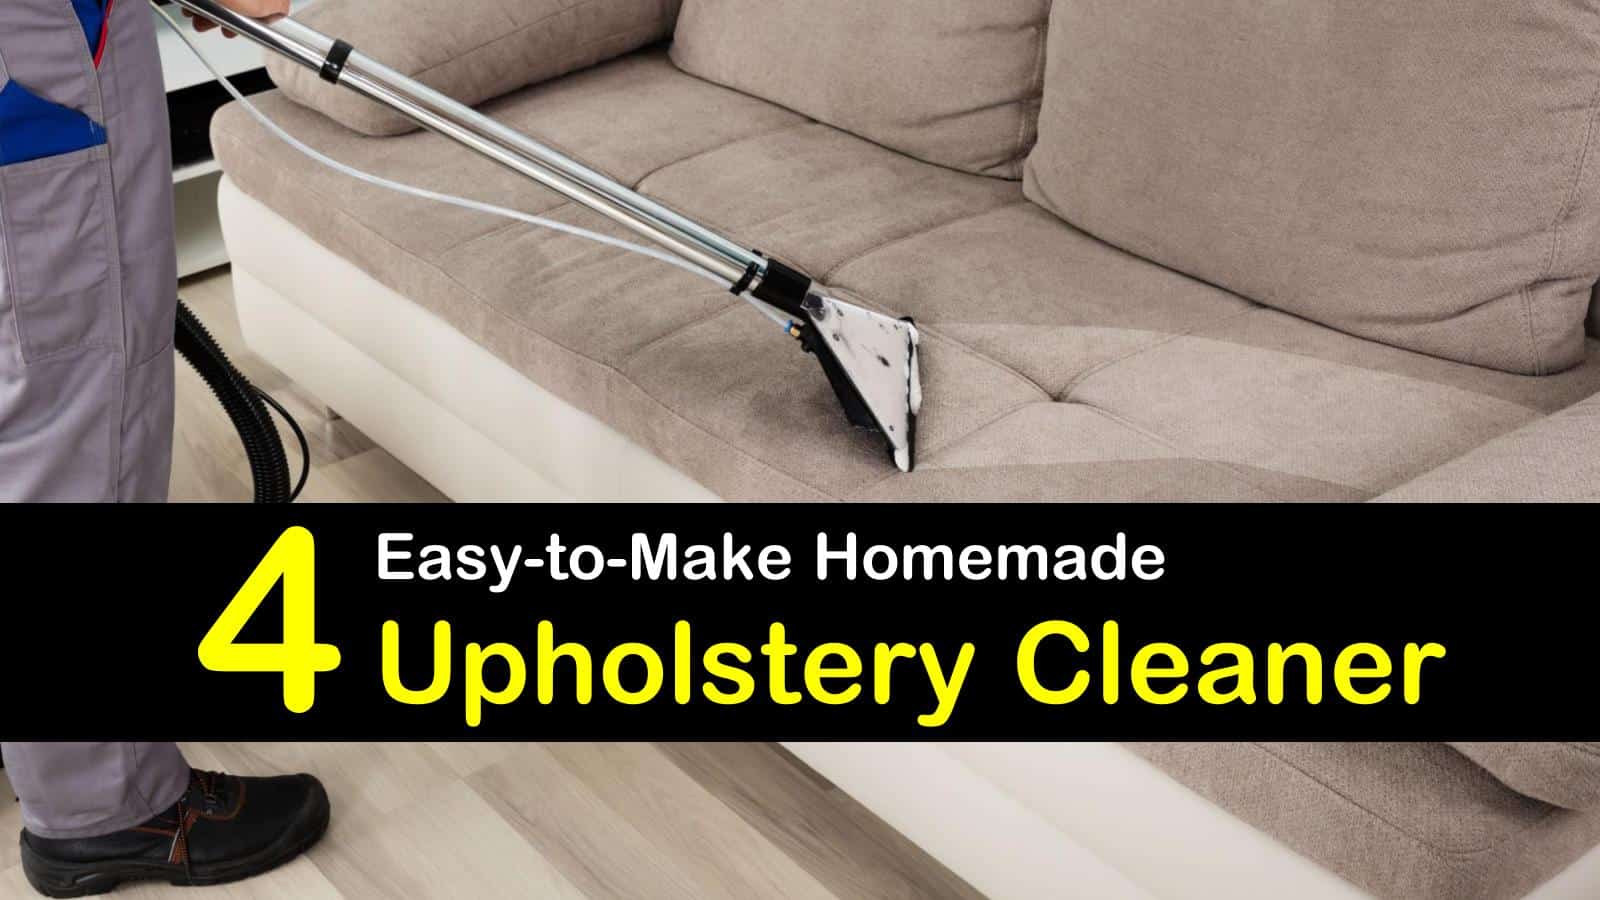 20 Homemade Upholstery Cleaner - How to Clean Upholstery